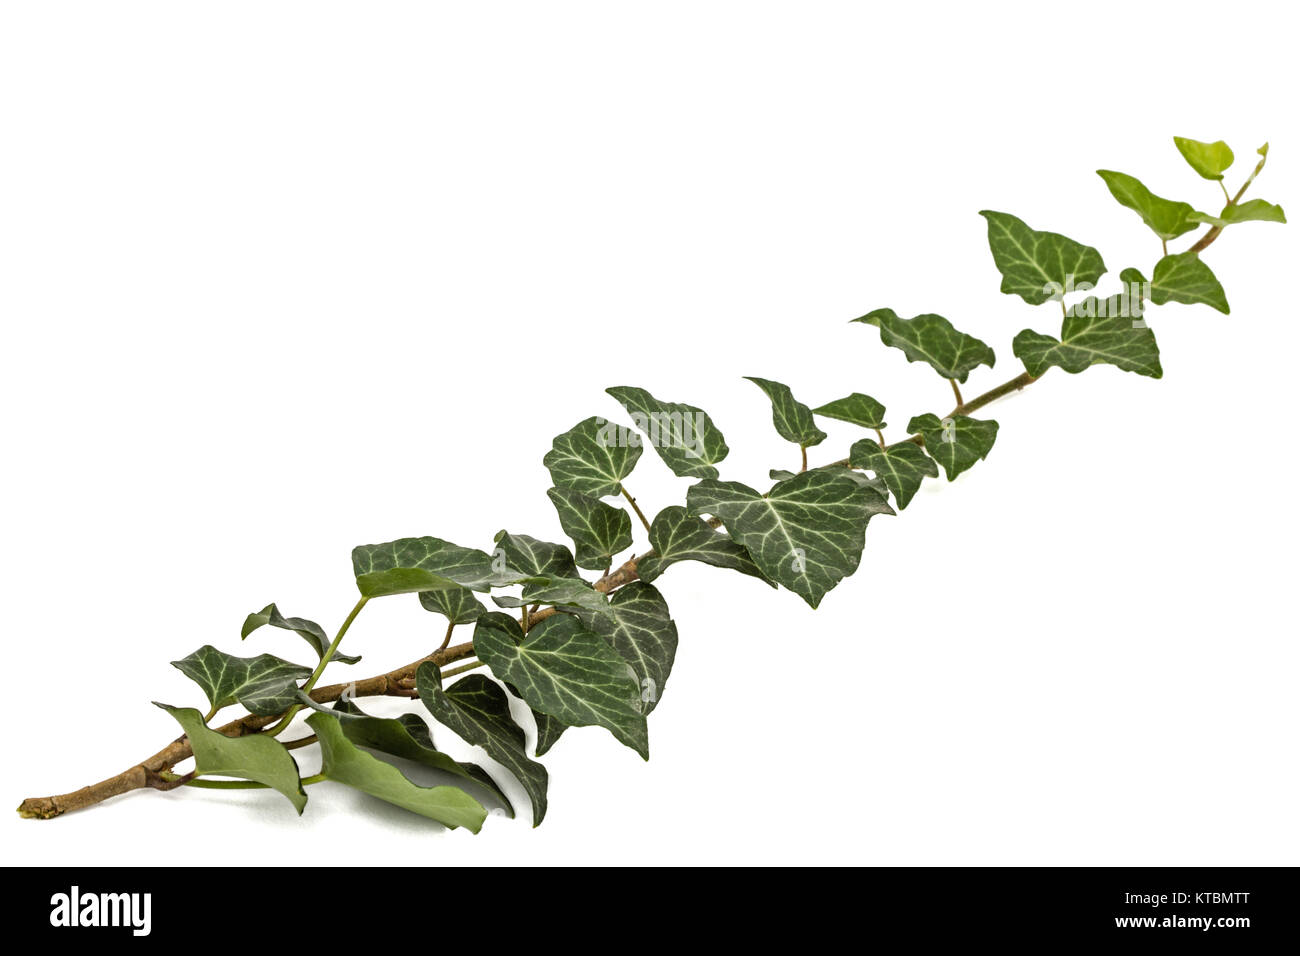 Green Ivy branch, isolated on white background Stock Photo